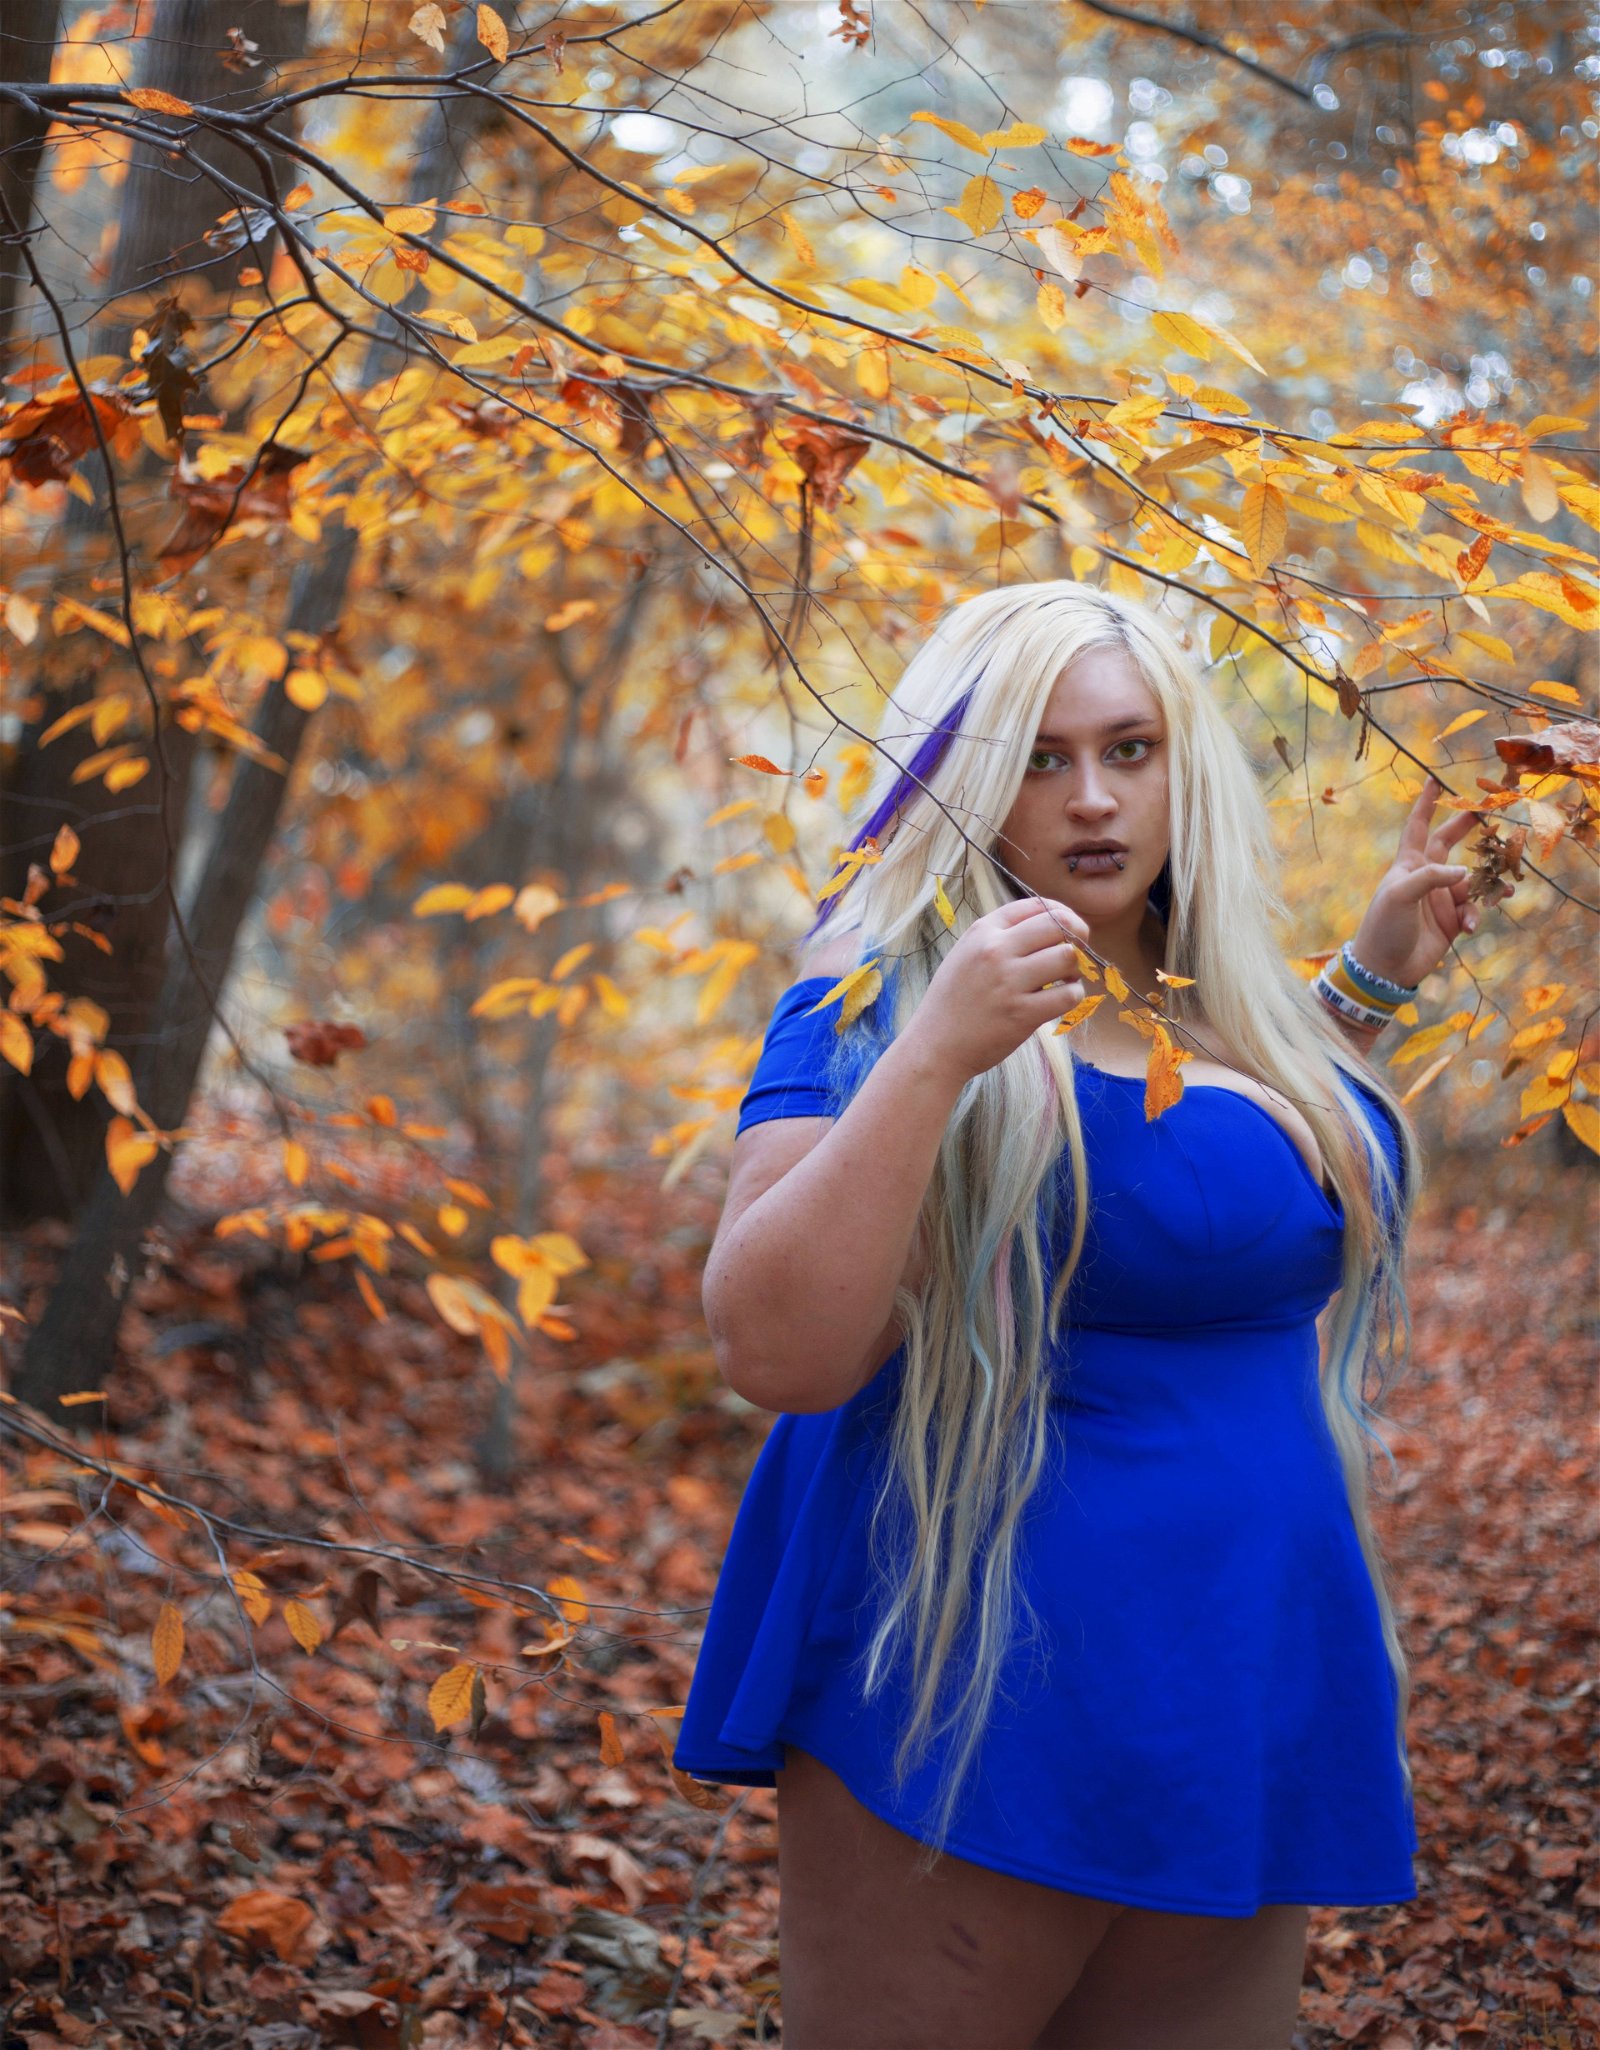 Watch the Photo by Cheesecakes with the username @Cheesecakes, who is a verified user, posted on December 17, 2018. The post is about the topic Phone sex chat. and the text says 'A modeling photo. #thick #plussize #bbw #longhair #Blonde #photography'